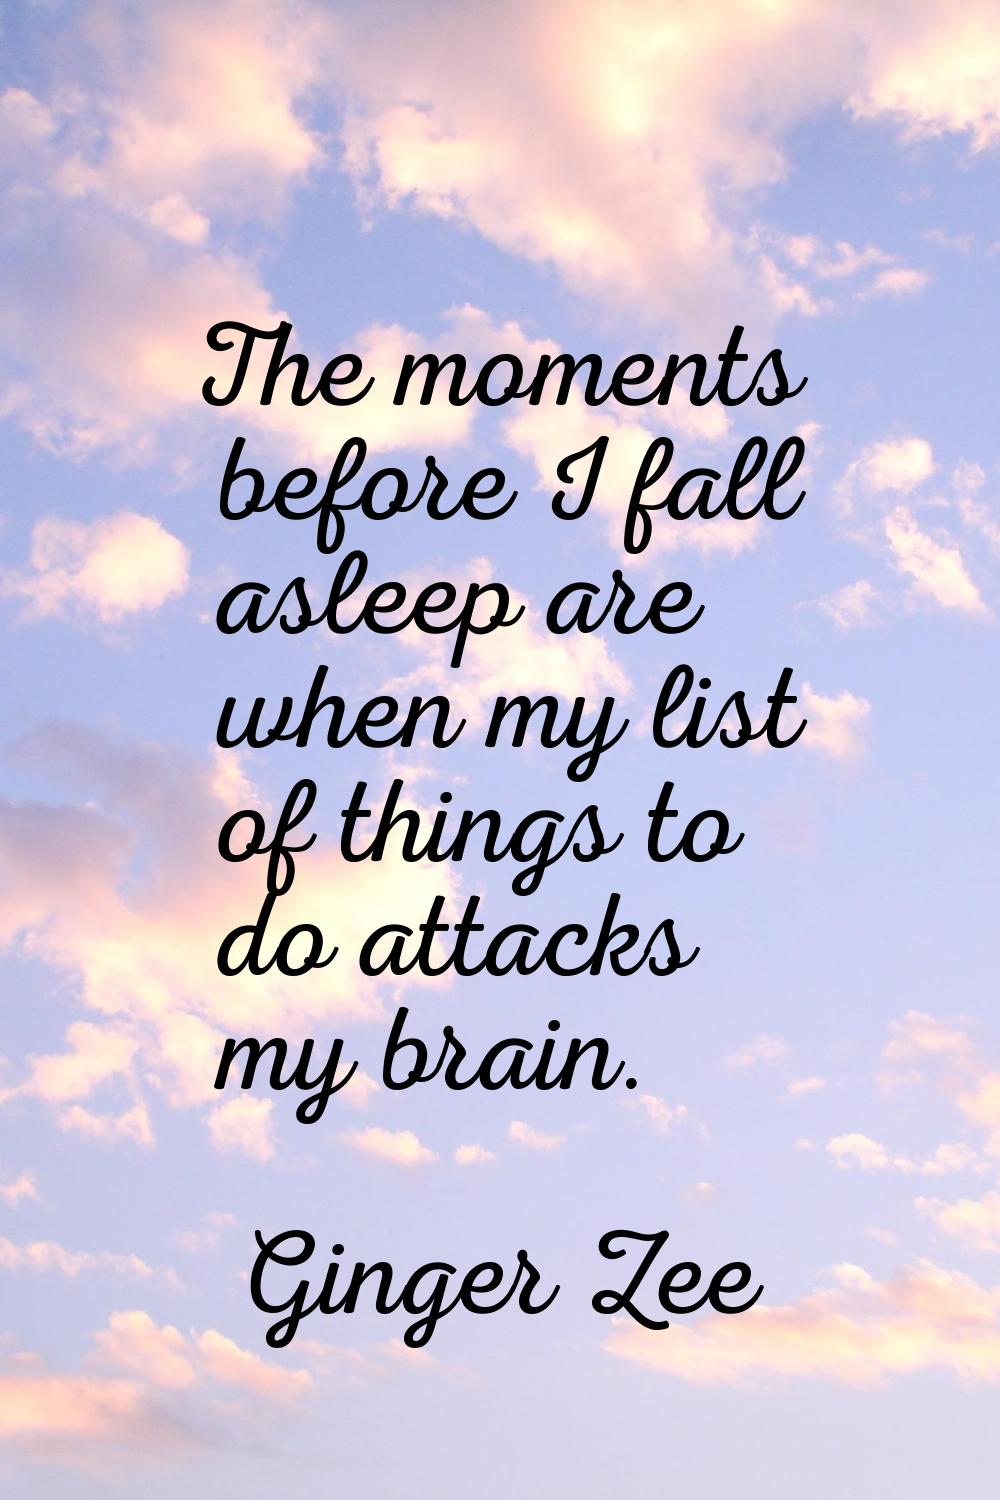 The moments before I fall asleep are when my list of things to do attacks my brain.